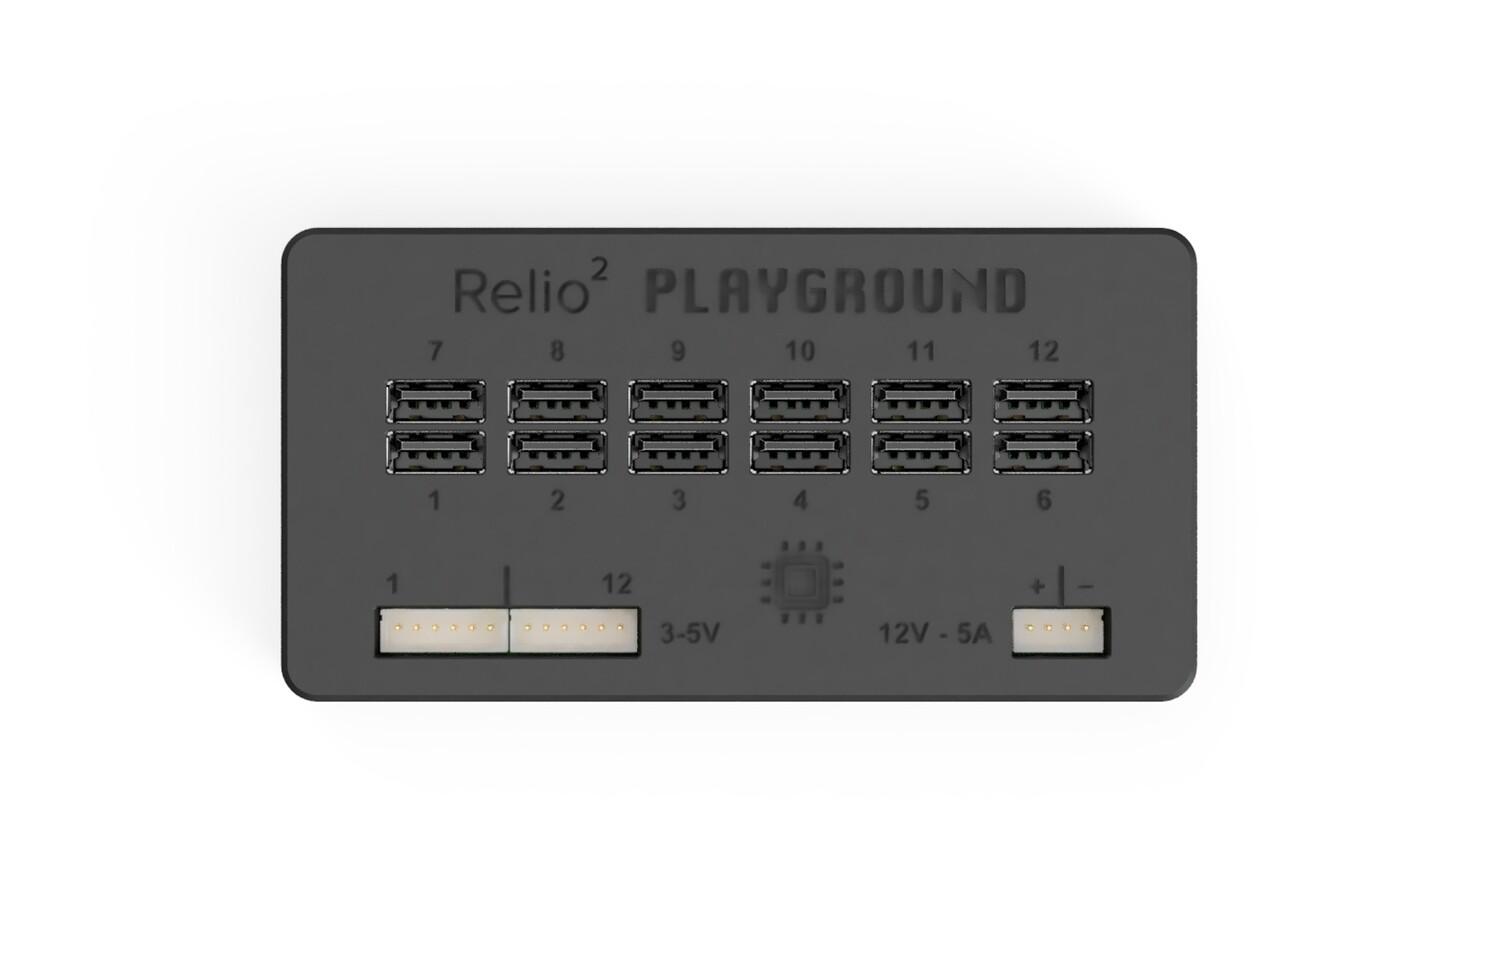 Relio² “PLAYGROUND” Routing Board for Lab Users